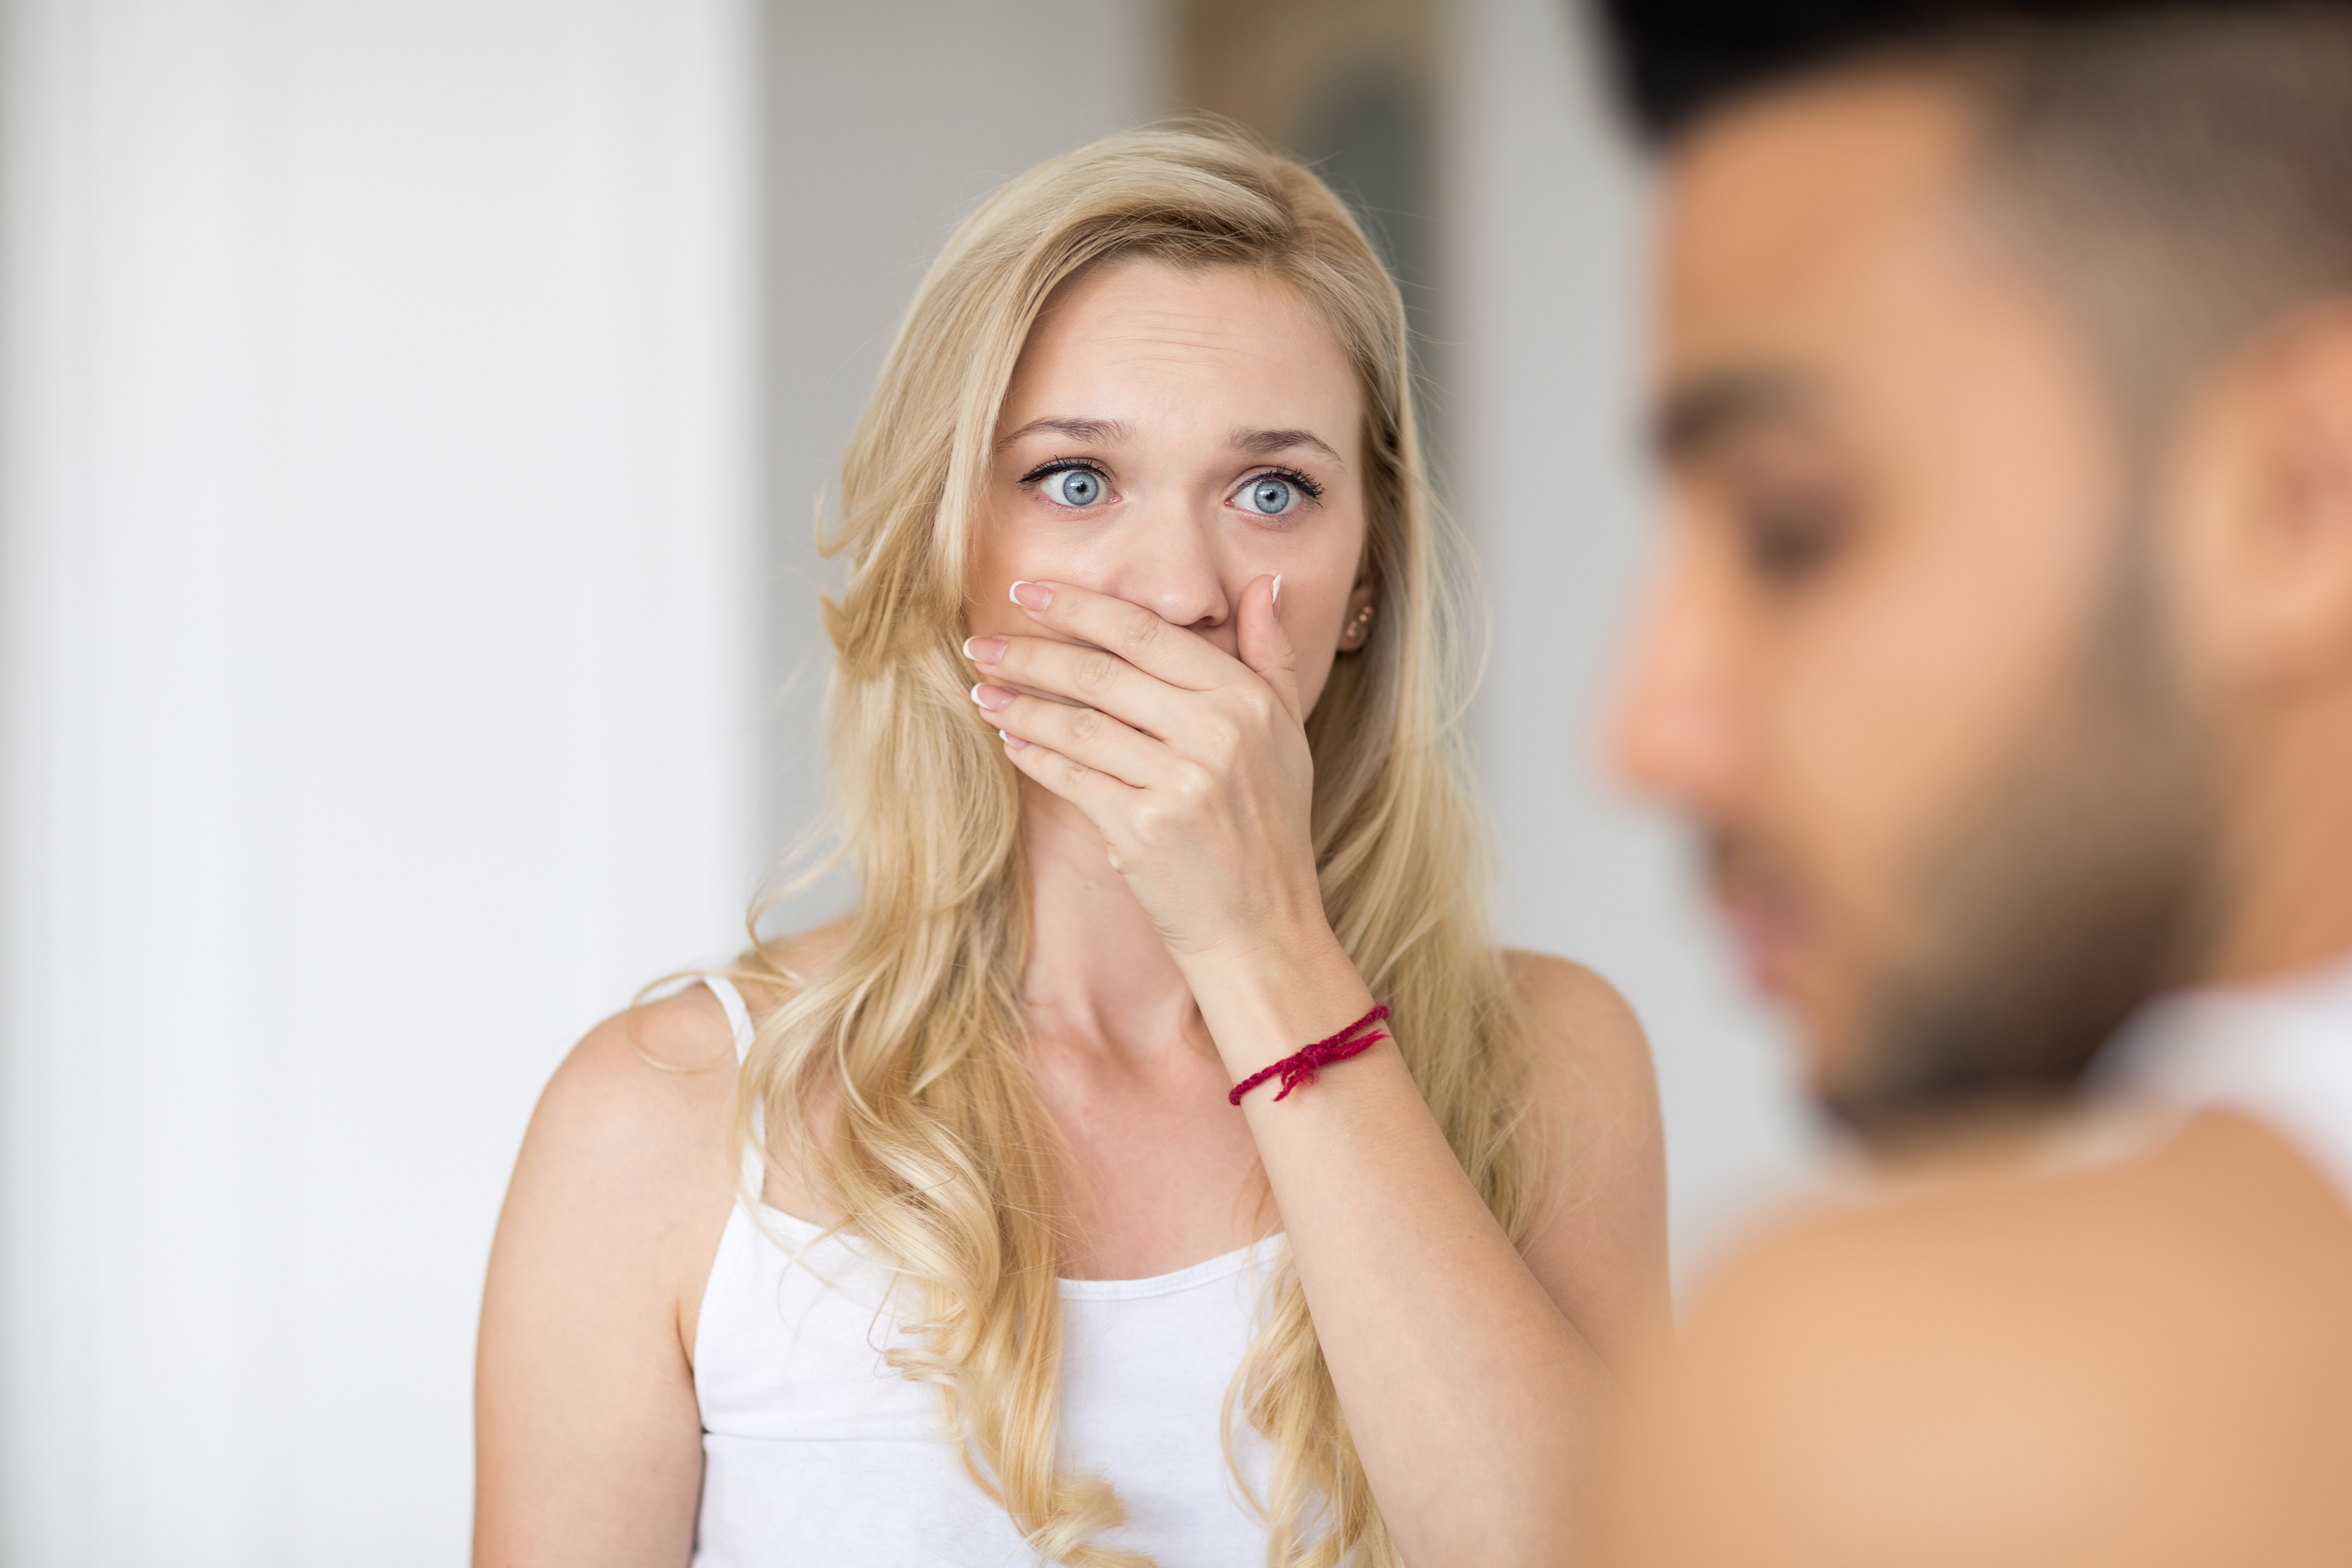 A shocked woman looking at a man | Source: Shutterstock